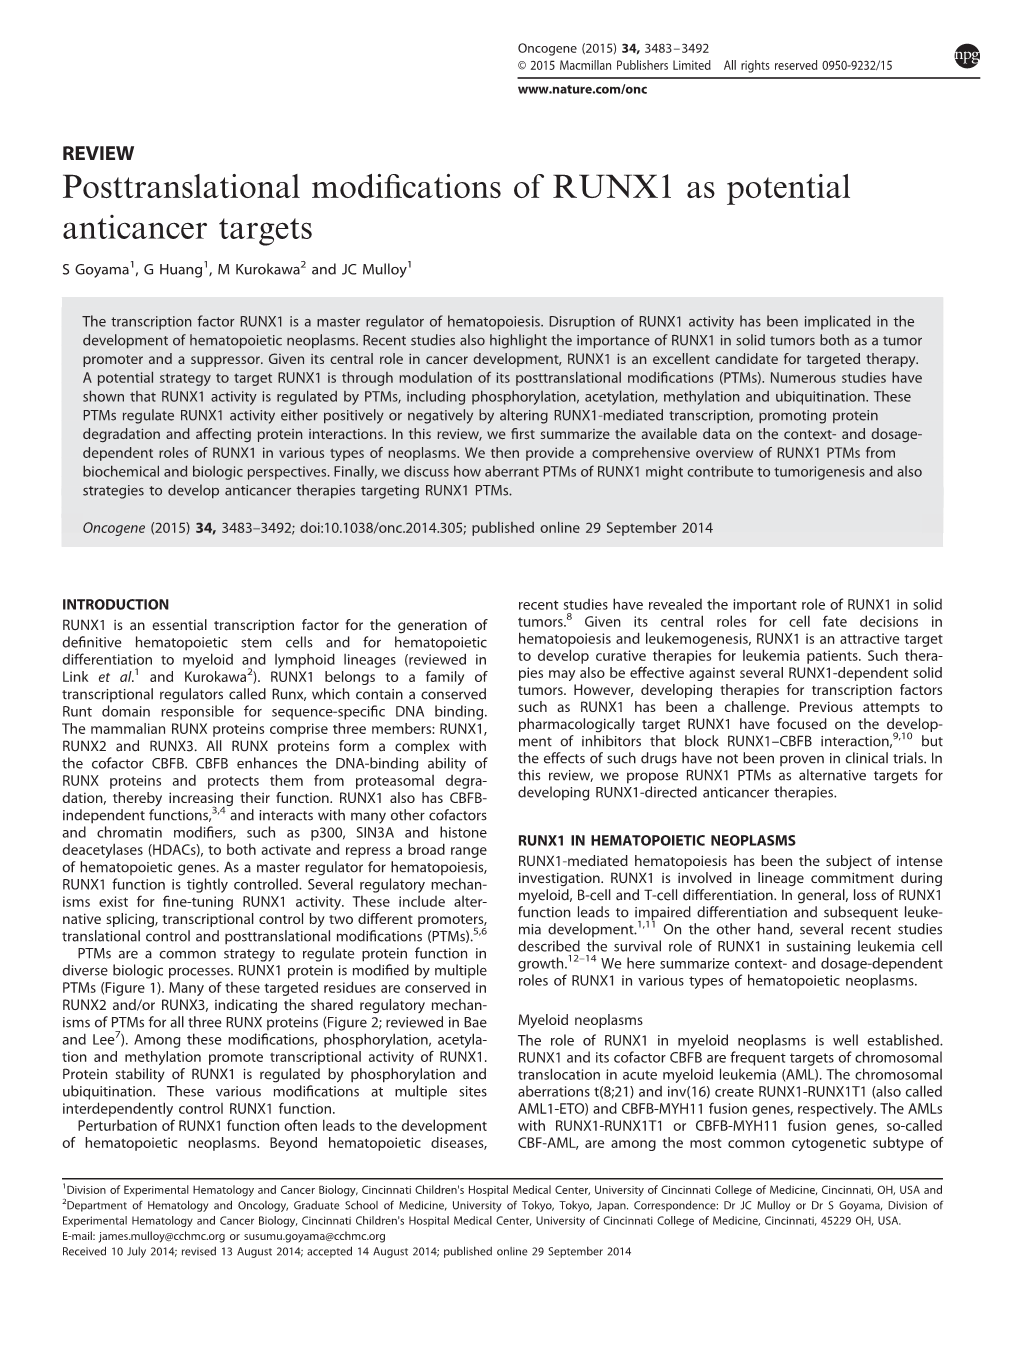 Posttranslational Modifications of RUNX1 As Potential Anticancer